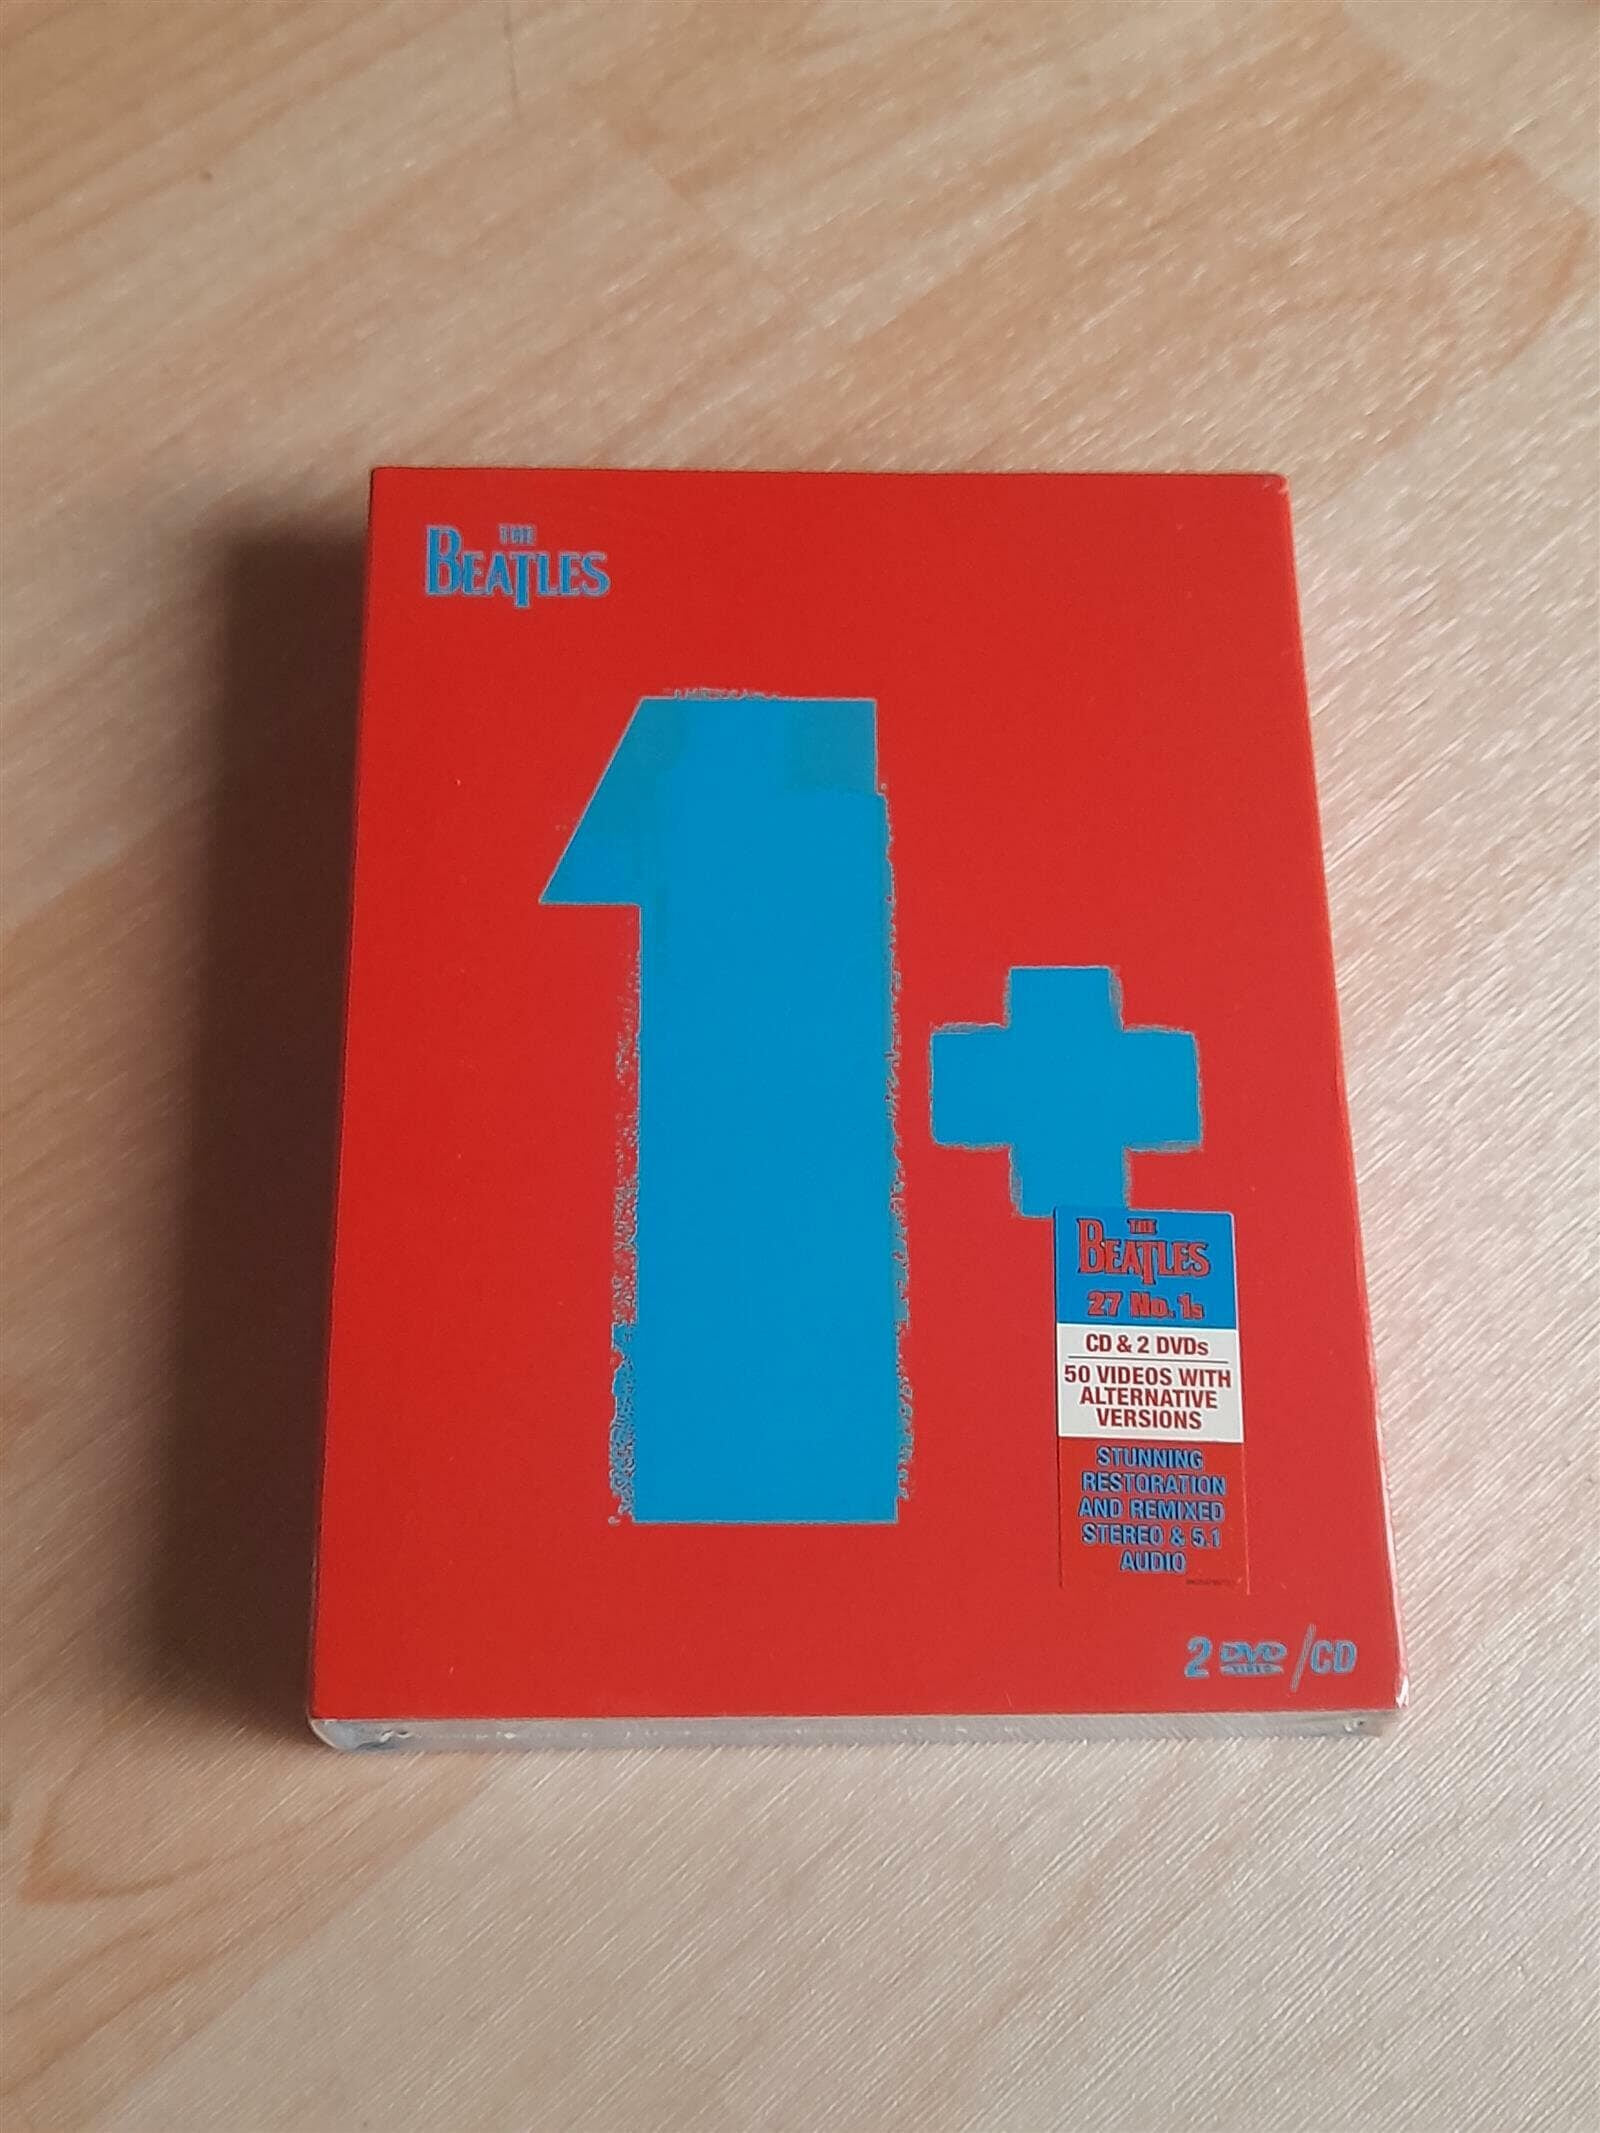 The Beatles - The Beatles 1+ (비틀즈 원 One 플러스) (Deluxe Limited Edition)